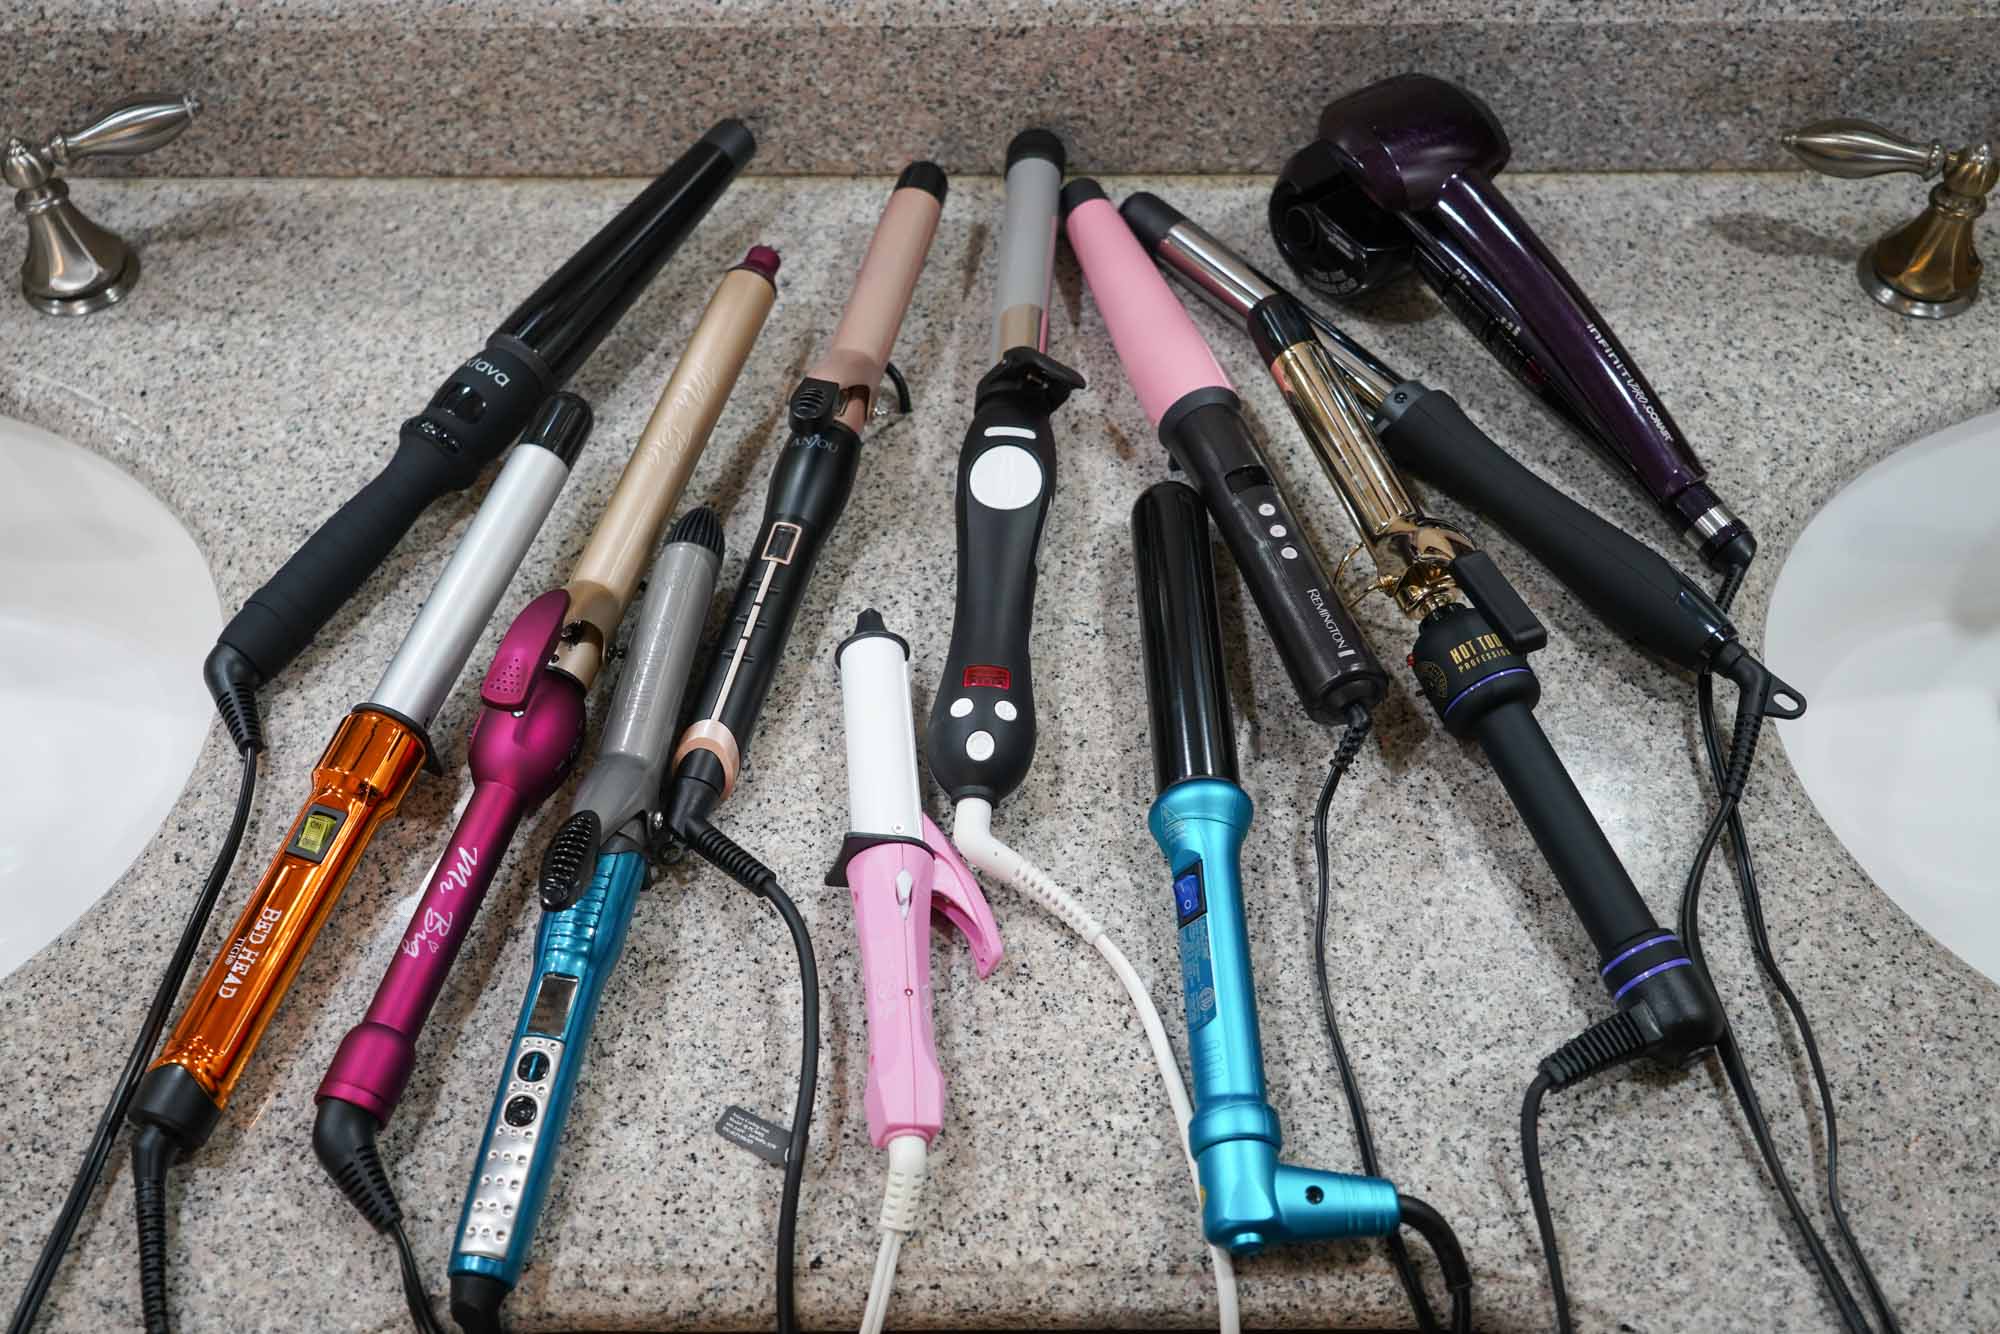 top rated curling irons